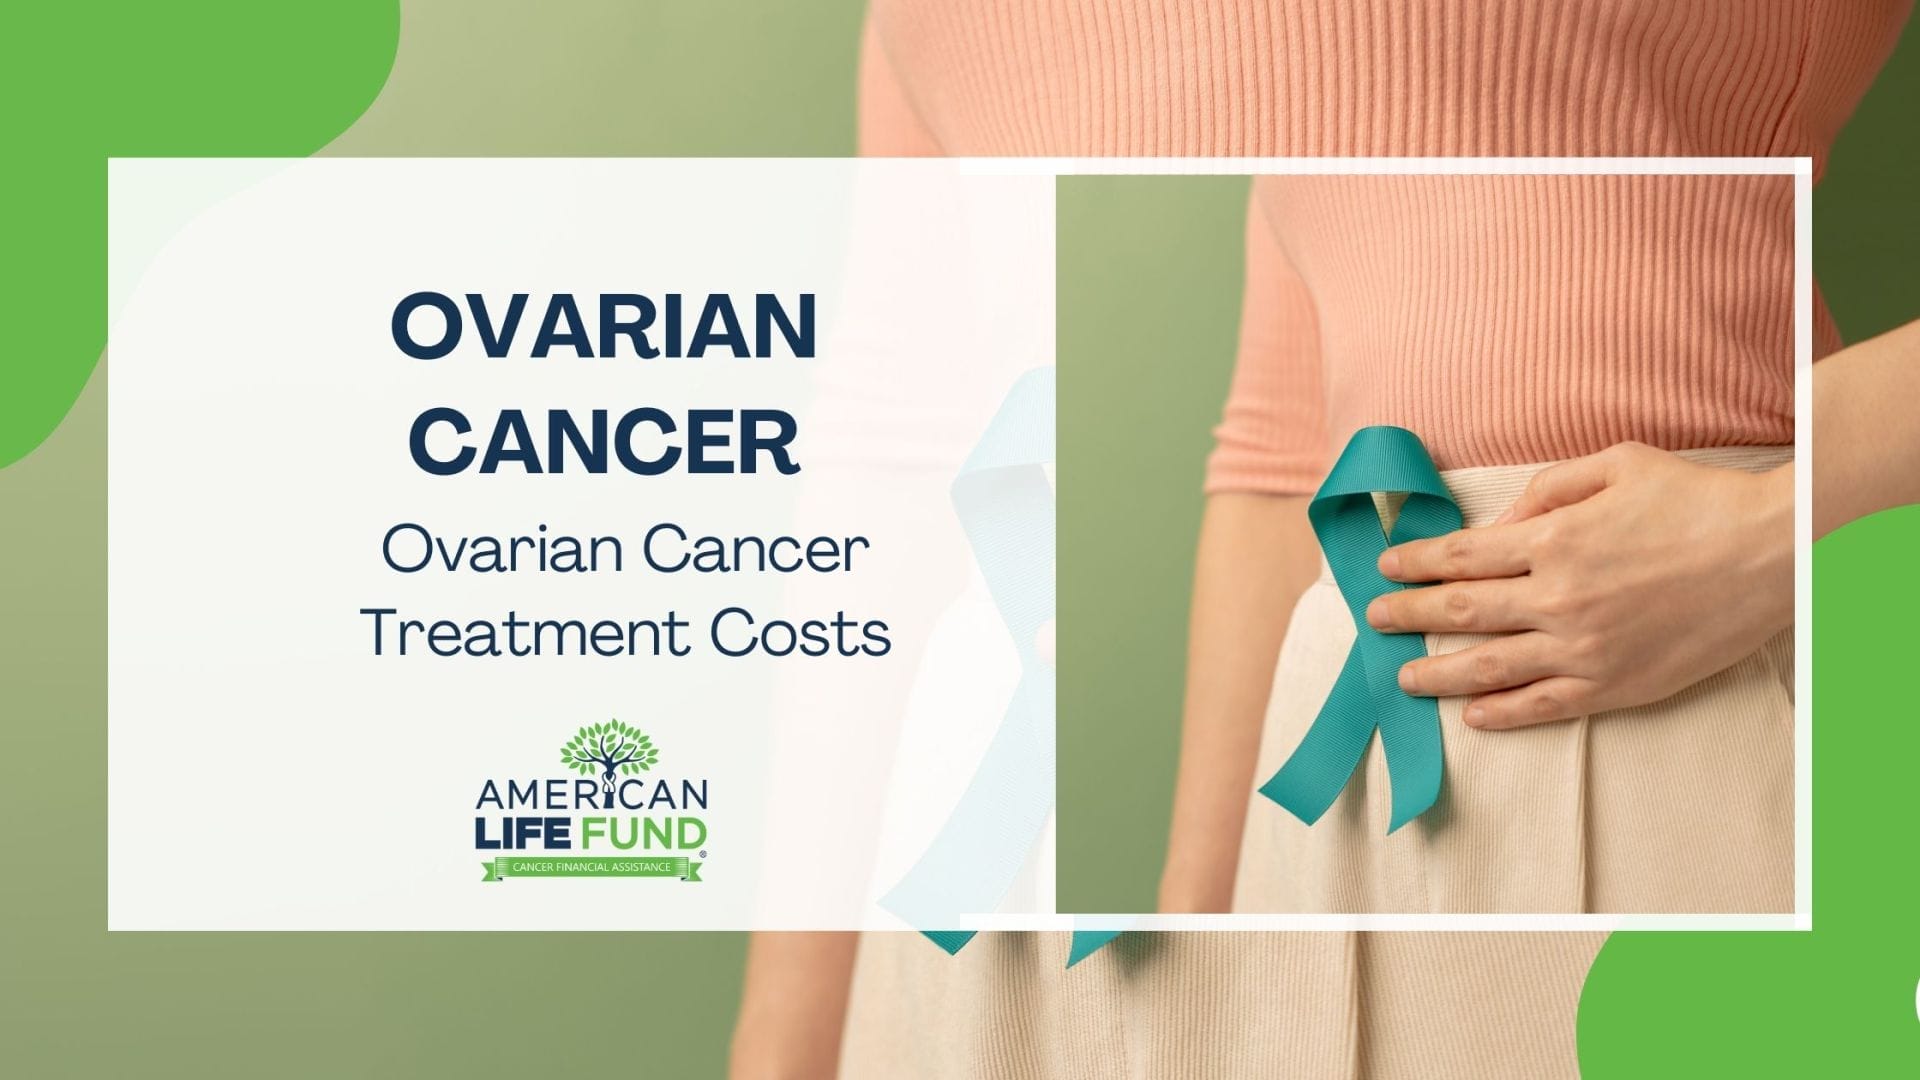 An informative graphic on ovarian cancer treatment costs, featuring a woman holding her abdomen with a teal ribbon, the symbol for ovarian cancer awareness.